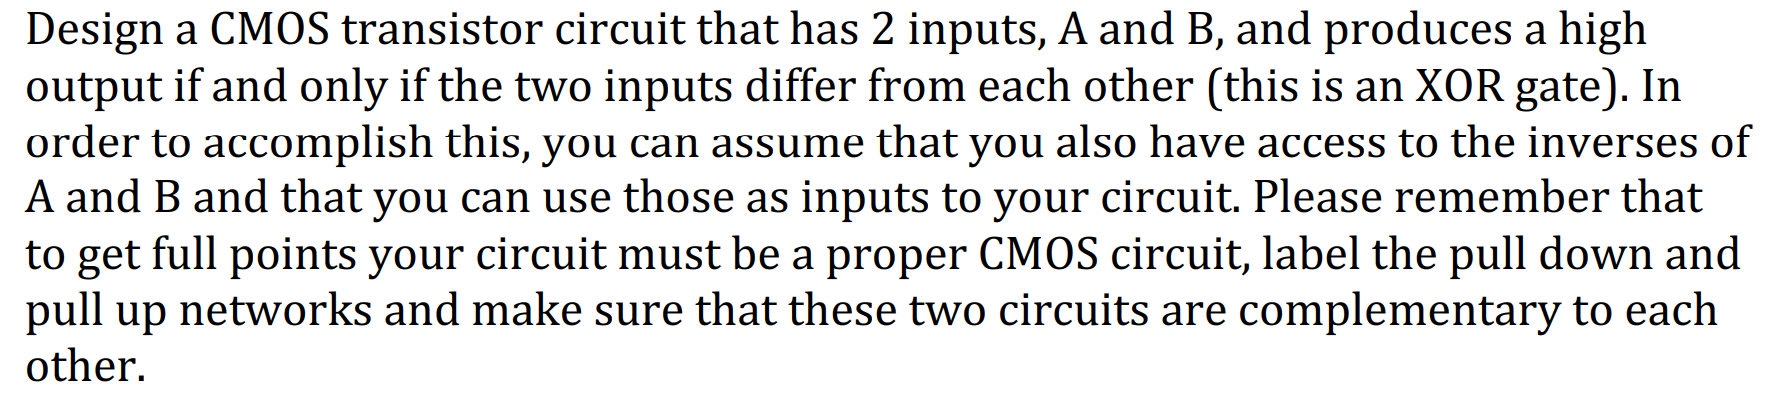 Design a CMOS transistor circuit that has 2 inputs, A and B, and produces a high
output if and only if the two inputs differ from each other (this is an XOR gate). In
order to accomplish this, you can assume that you also have access to the inverses of
A and B and that you can use those as inputs to your circuit. Please remember that
to get full points your circuit must be a proper CMOS circuit, label the pull down and
pull up networks and make sure that these two circuits are complementary to each
other.
